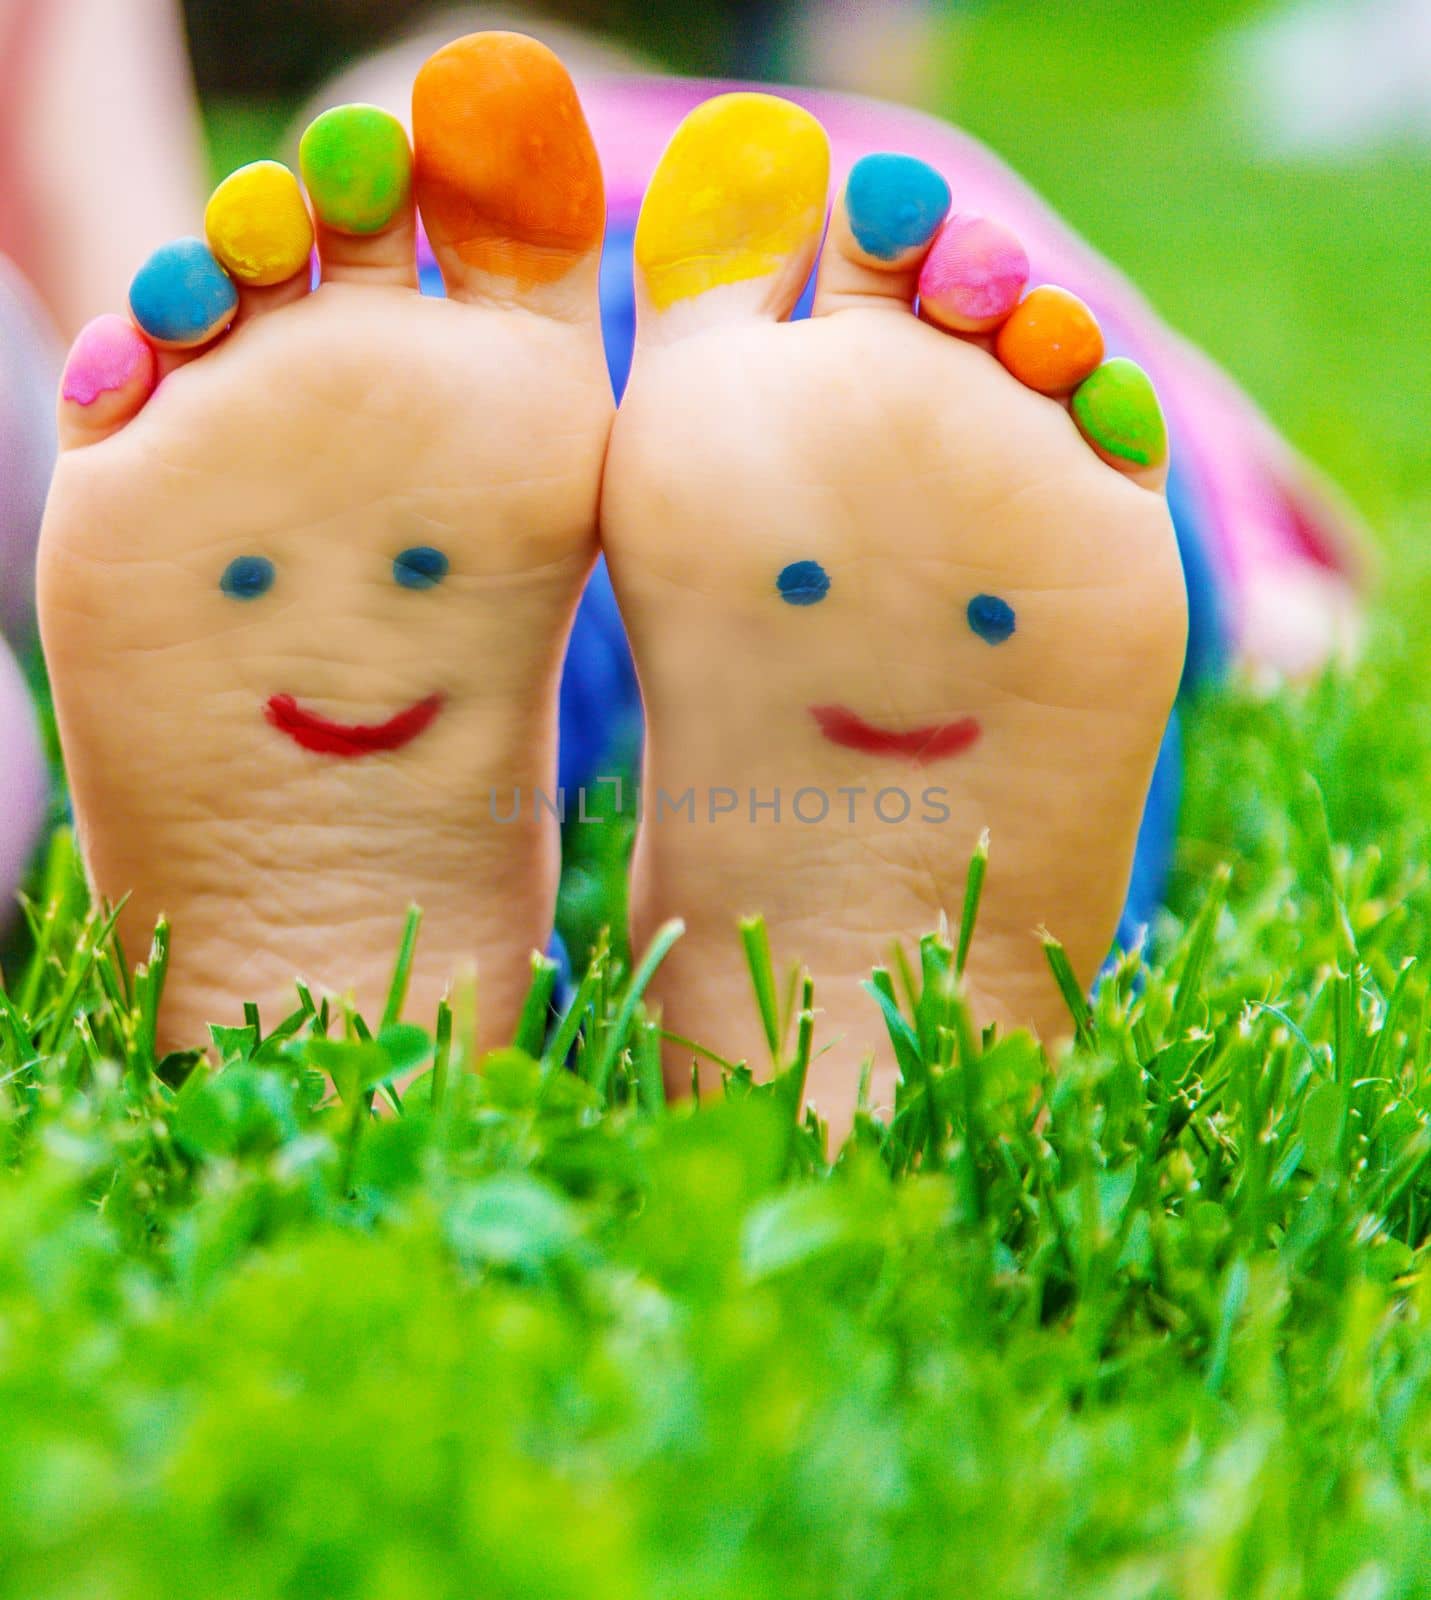 Children's feet with a pattern of paints smile on the green grass. Selective focus.child